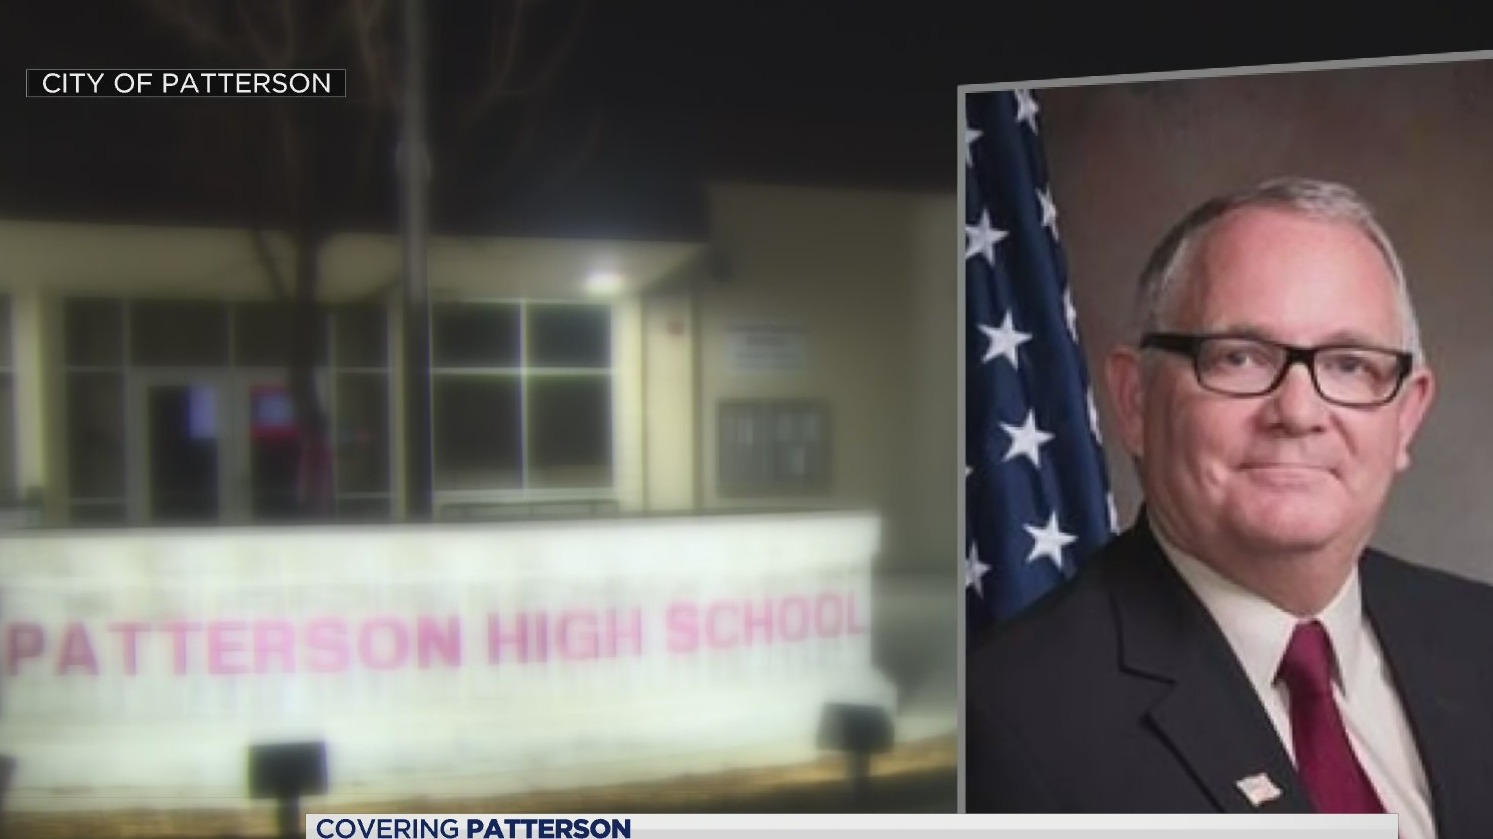 Patterson Mayor Suspended Without Pay From Teaching Position Amid Snapchat Scandal